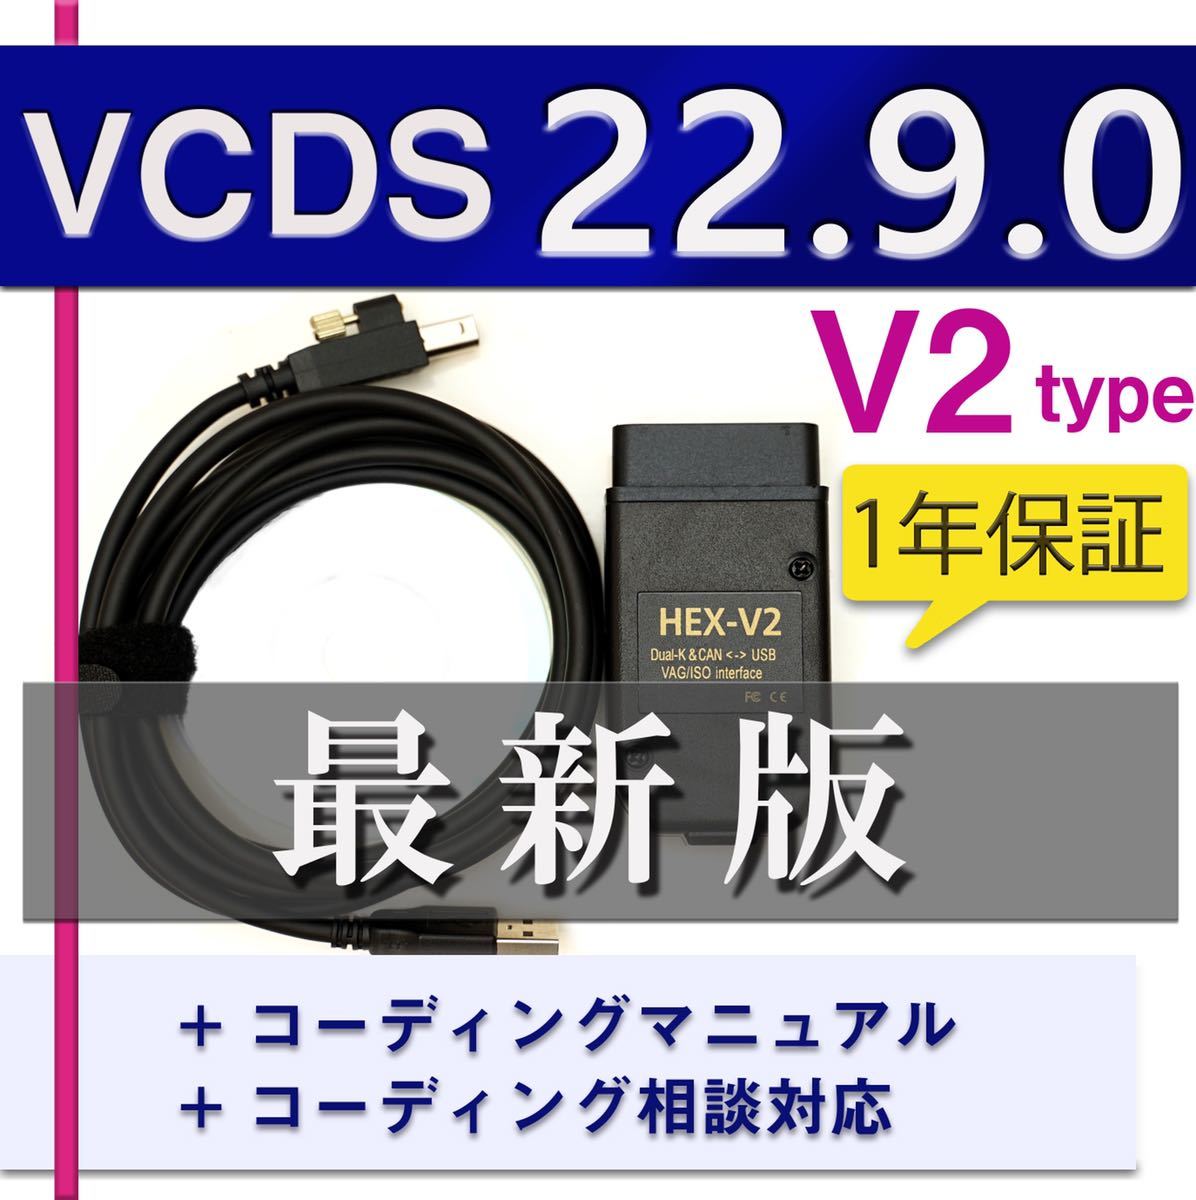 [ newest 22.9.0]V2 1 years guarantee VCDS interchangeable cable coding manual attaching Audi *VW vehicle . Golf 7.5 audi a1 A3 A4